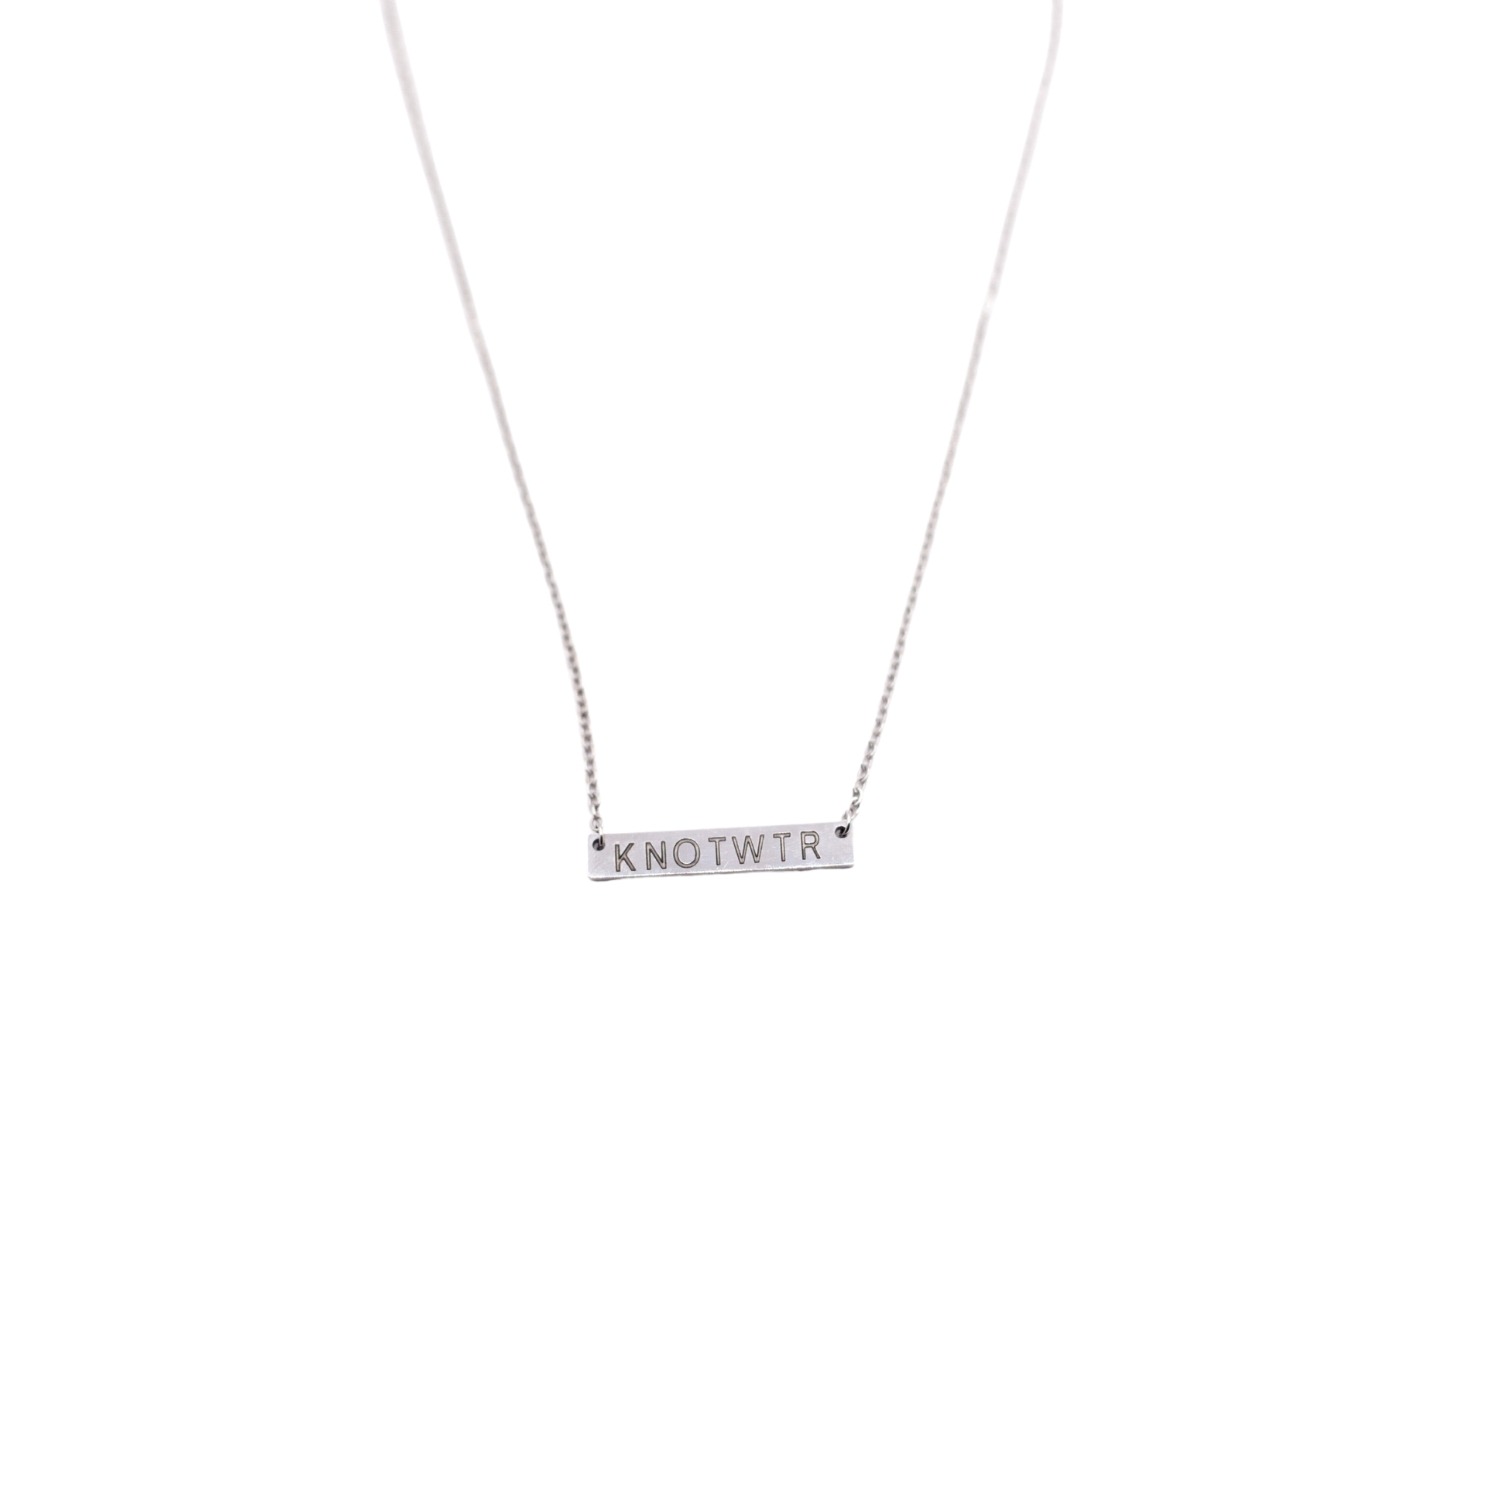 Women's Silver Thin Necklace KnotWtr